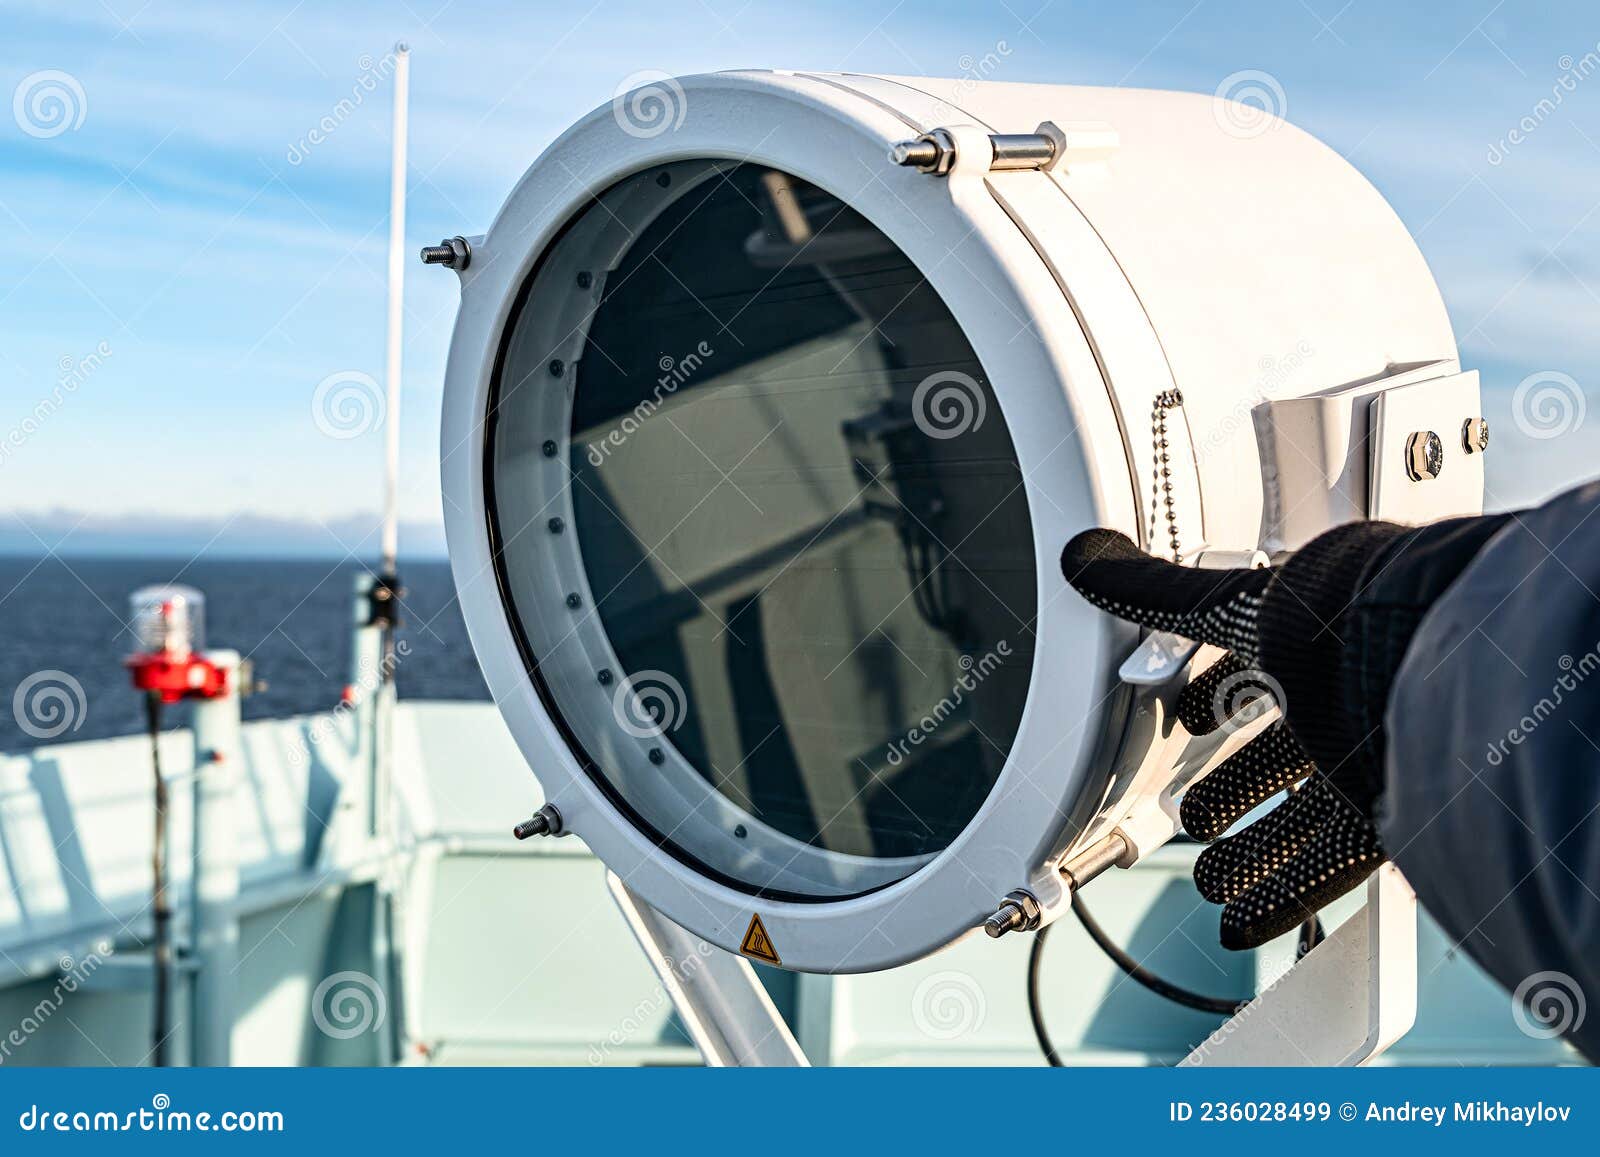 The Lamp is Designed To Provide Morse Code Light Signals and Lighting. Visual Communication with Ships Stock Image - Image of metal, mindfulness: 236028499